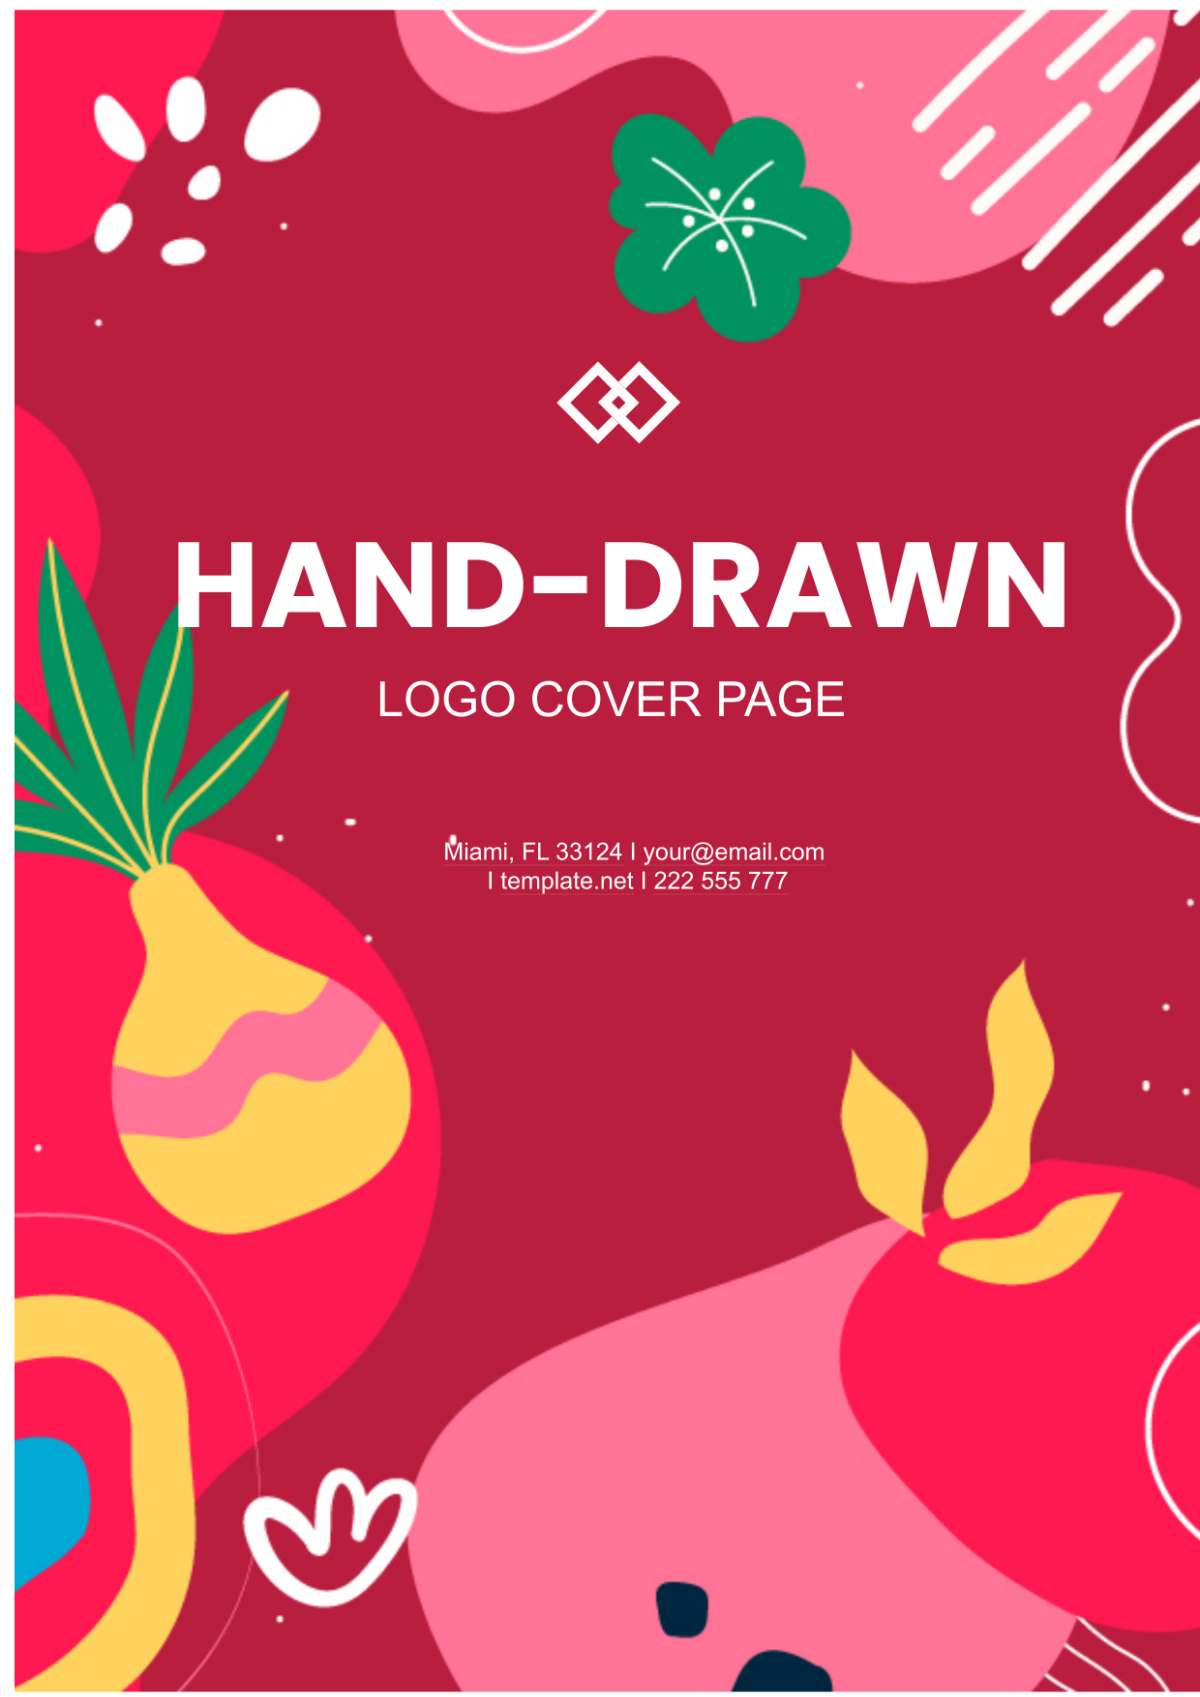 Hand-Drawn Logo Cover Page